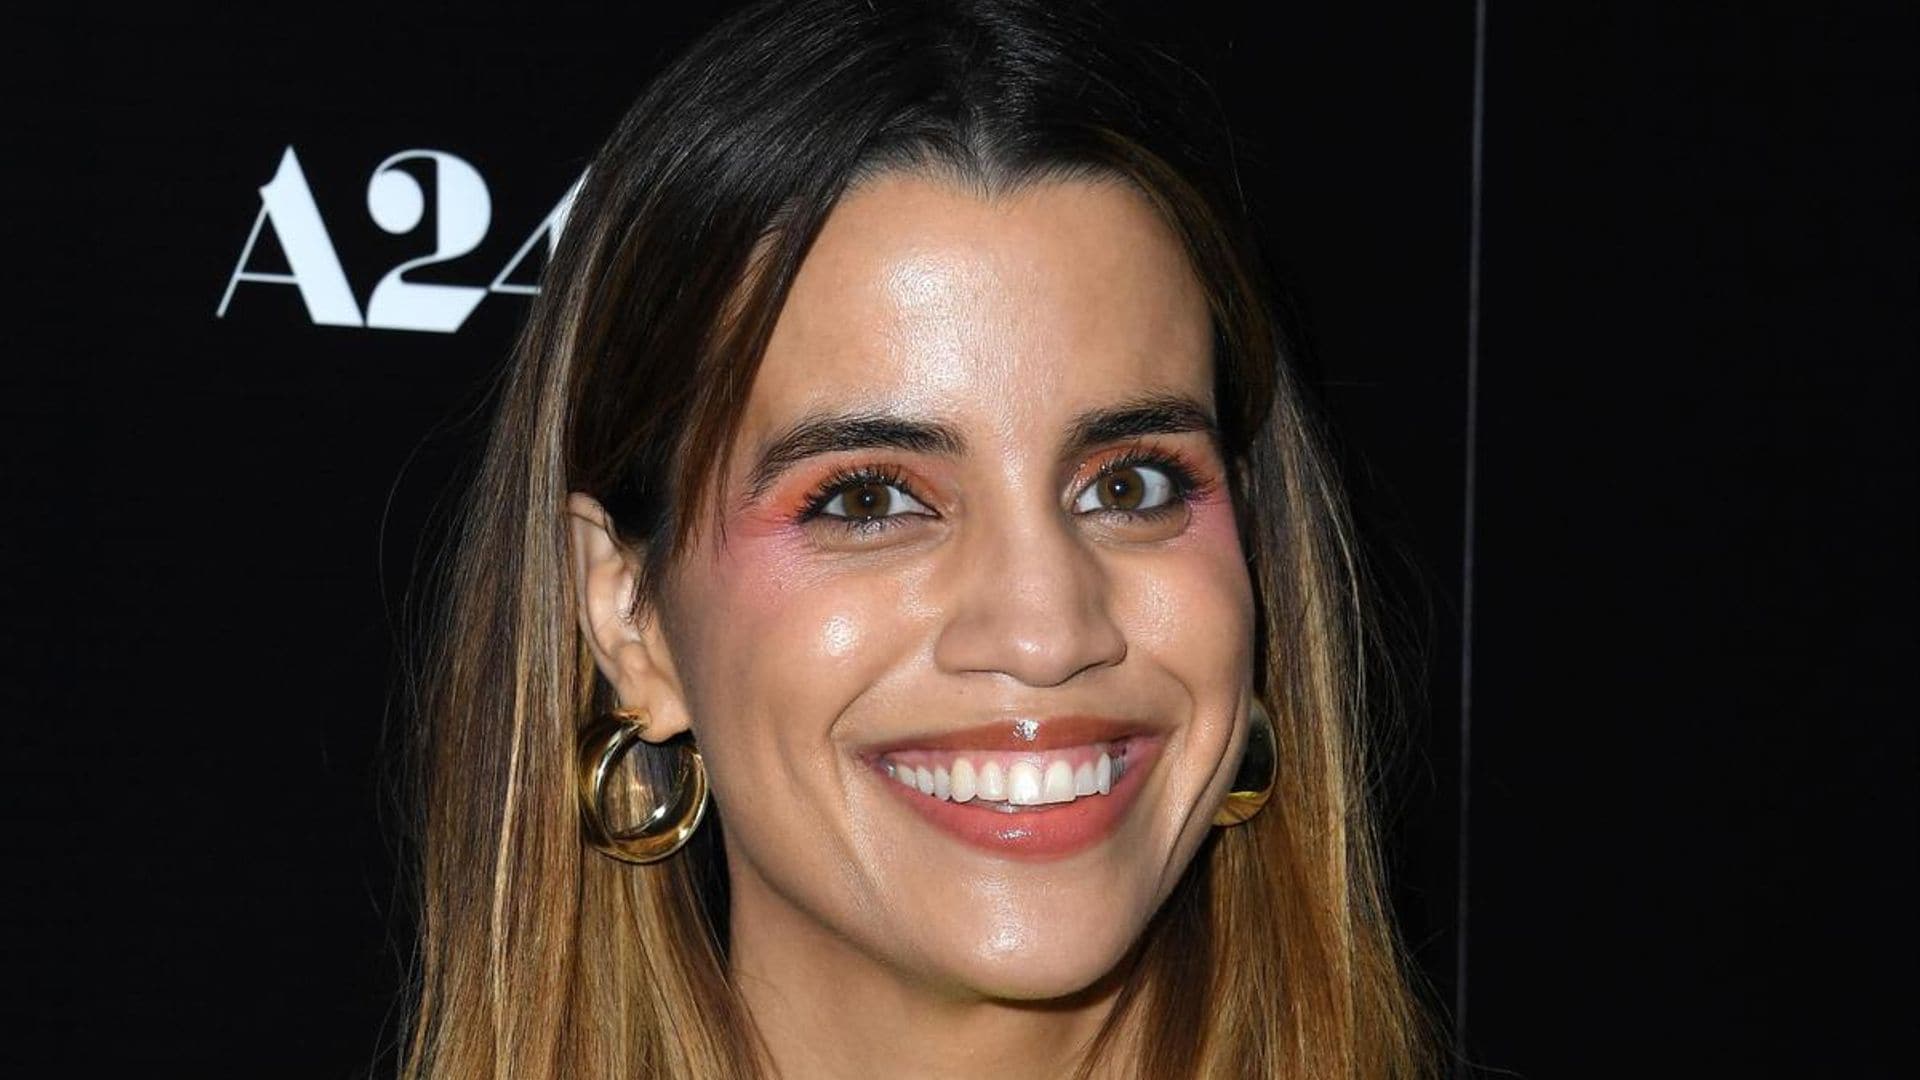 Natalie Morales has been cast in season 3 of “The Morning Show”